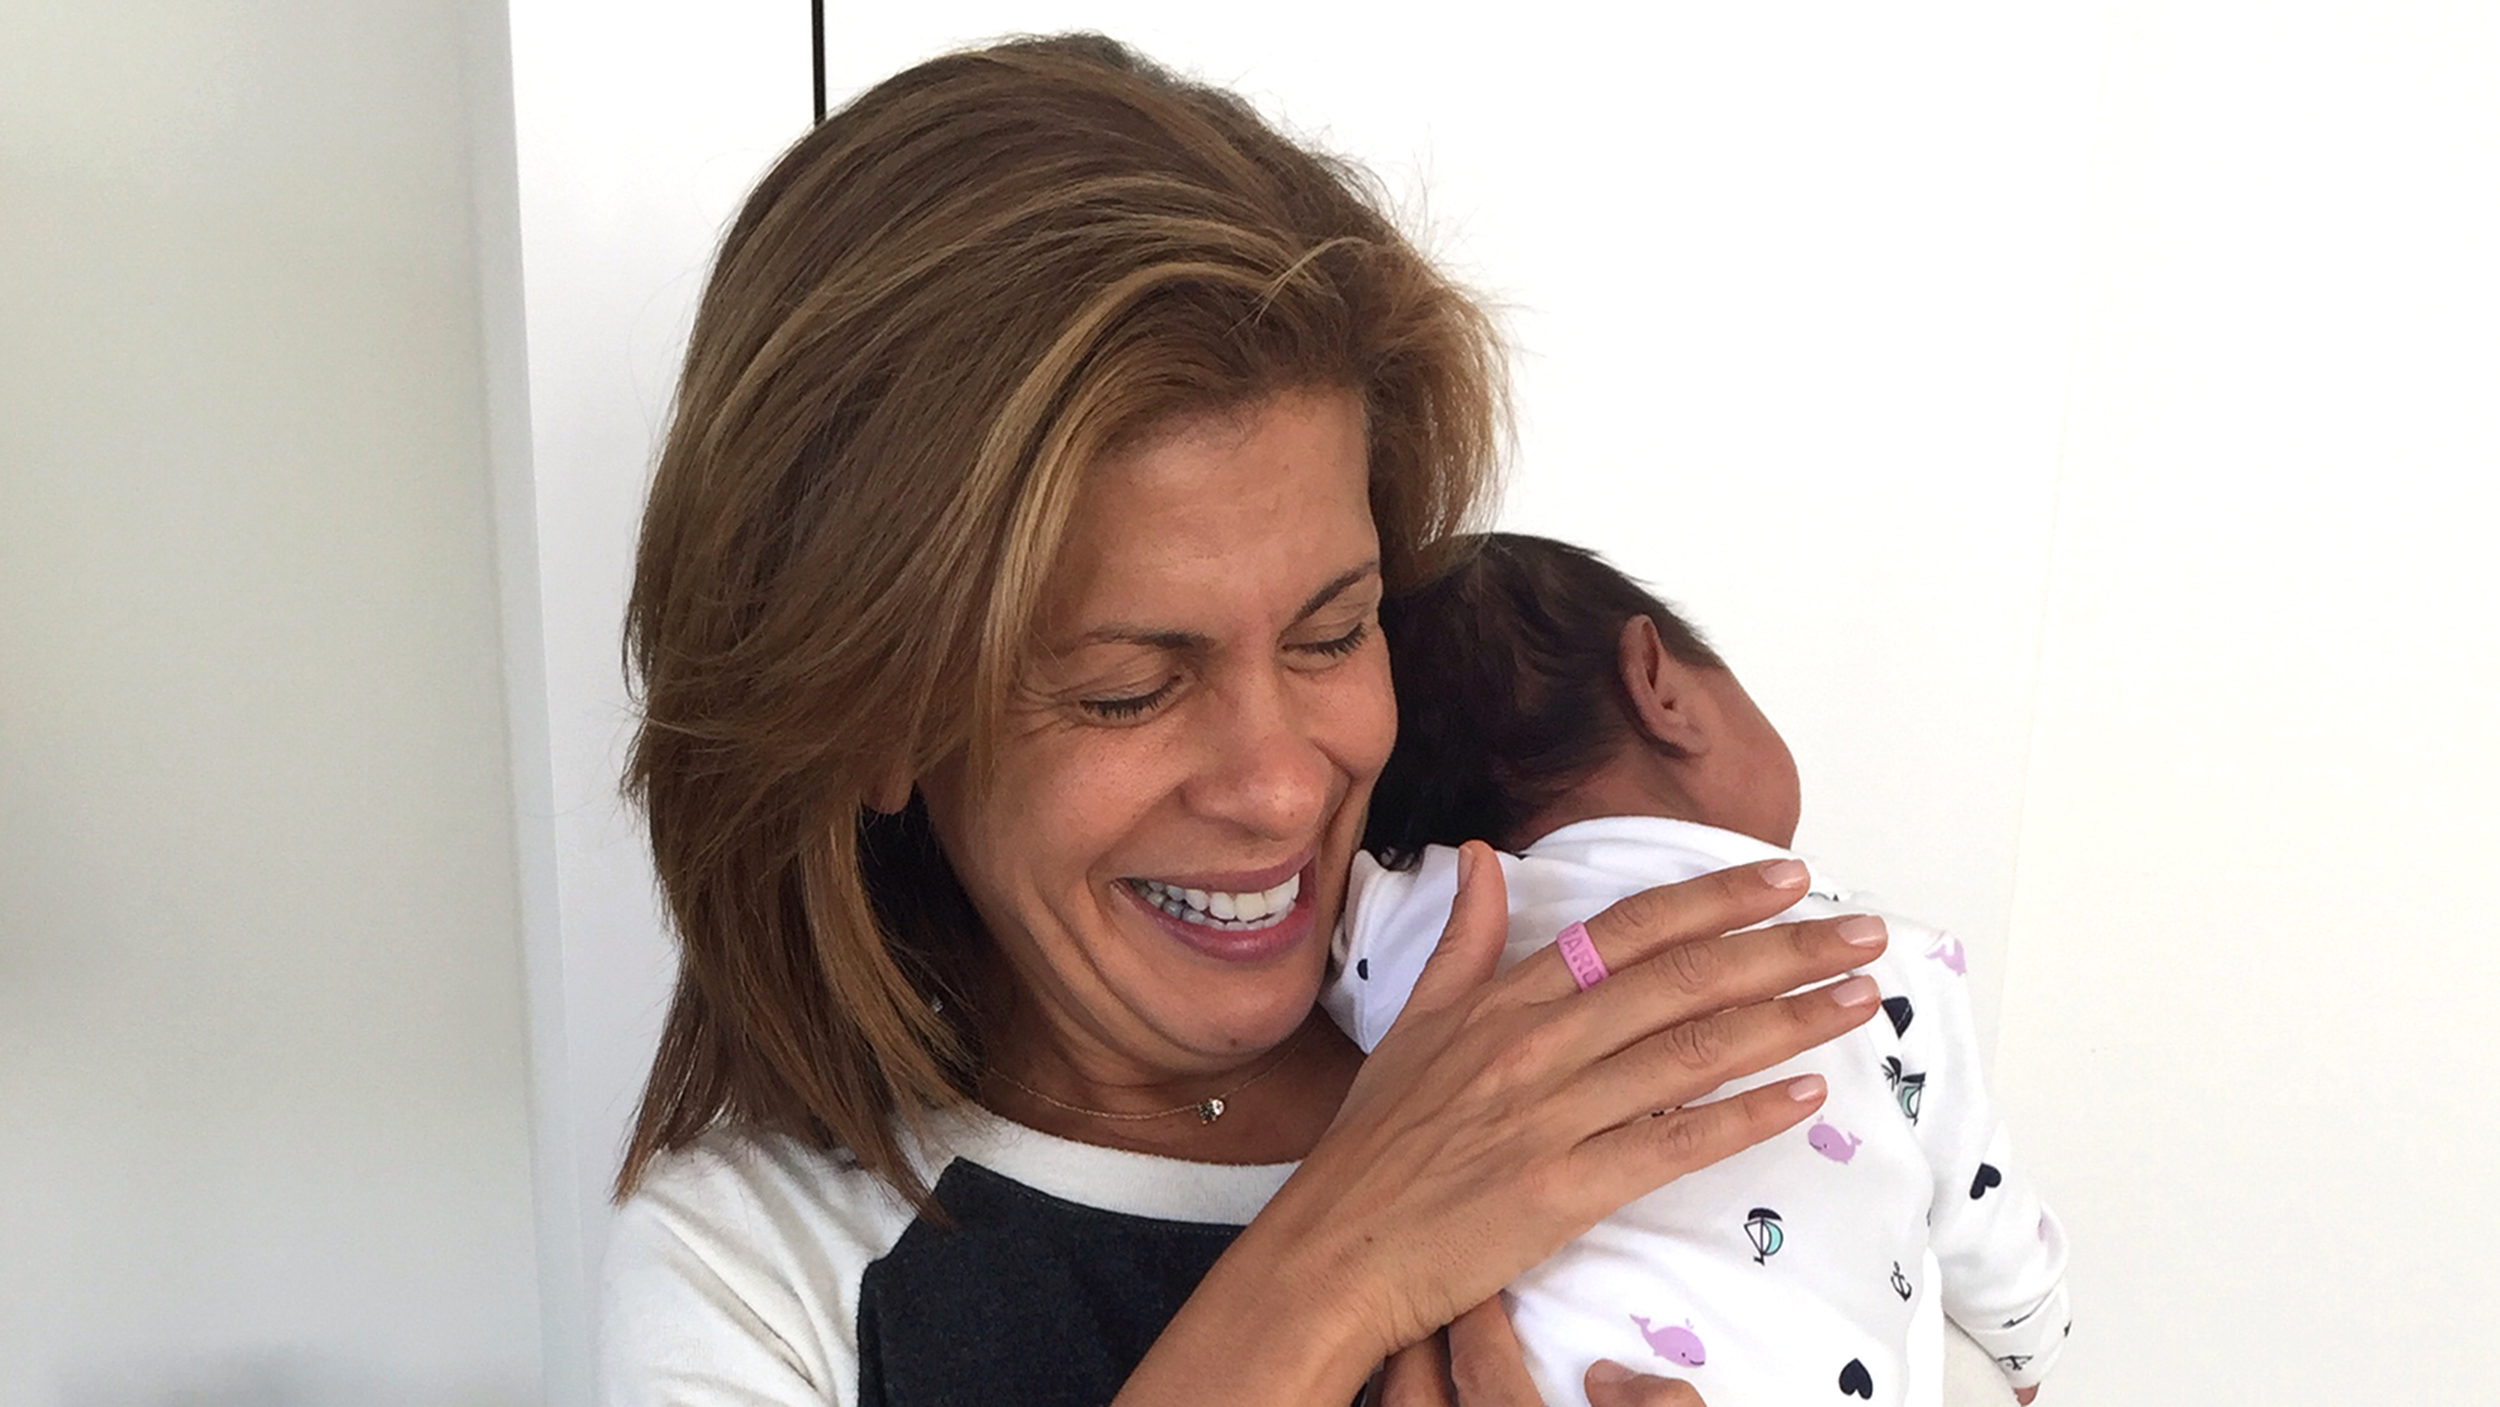 It's a girl! Hoda Kotb announces she's adopted a baby - TODAY.com